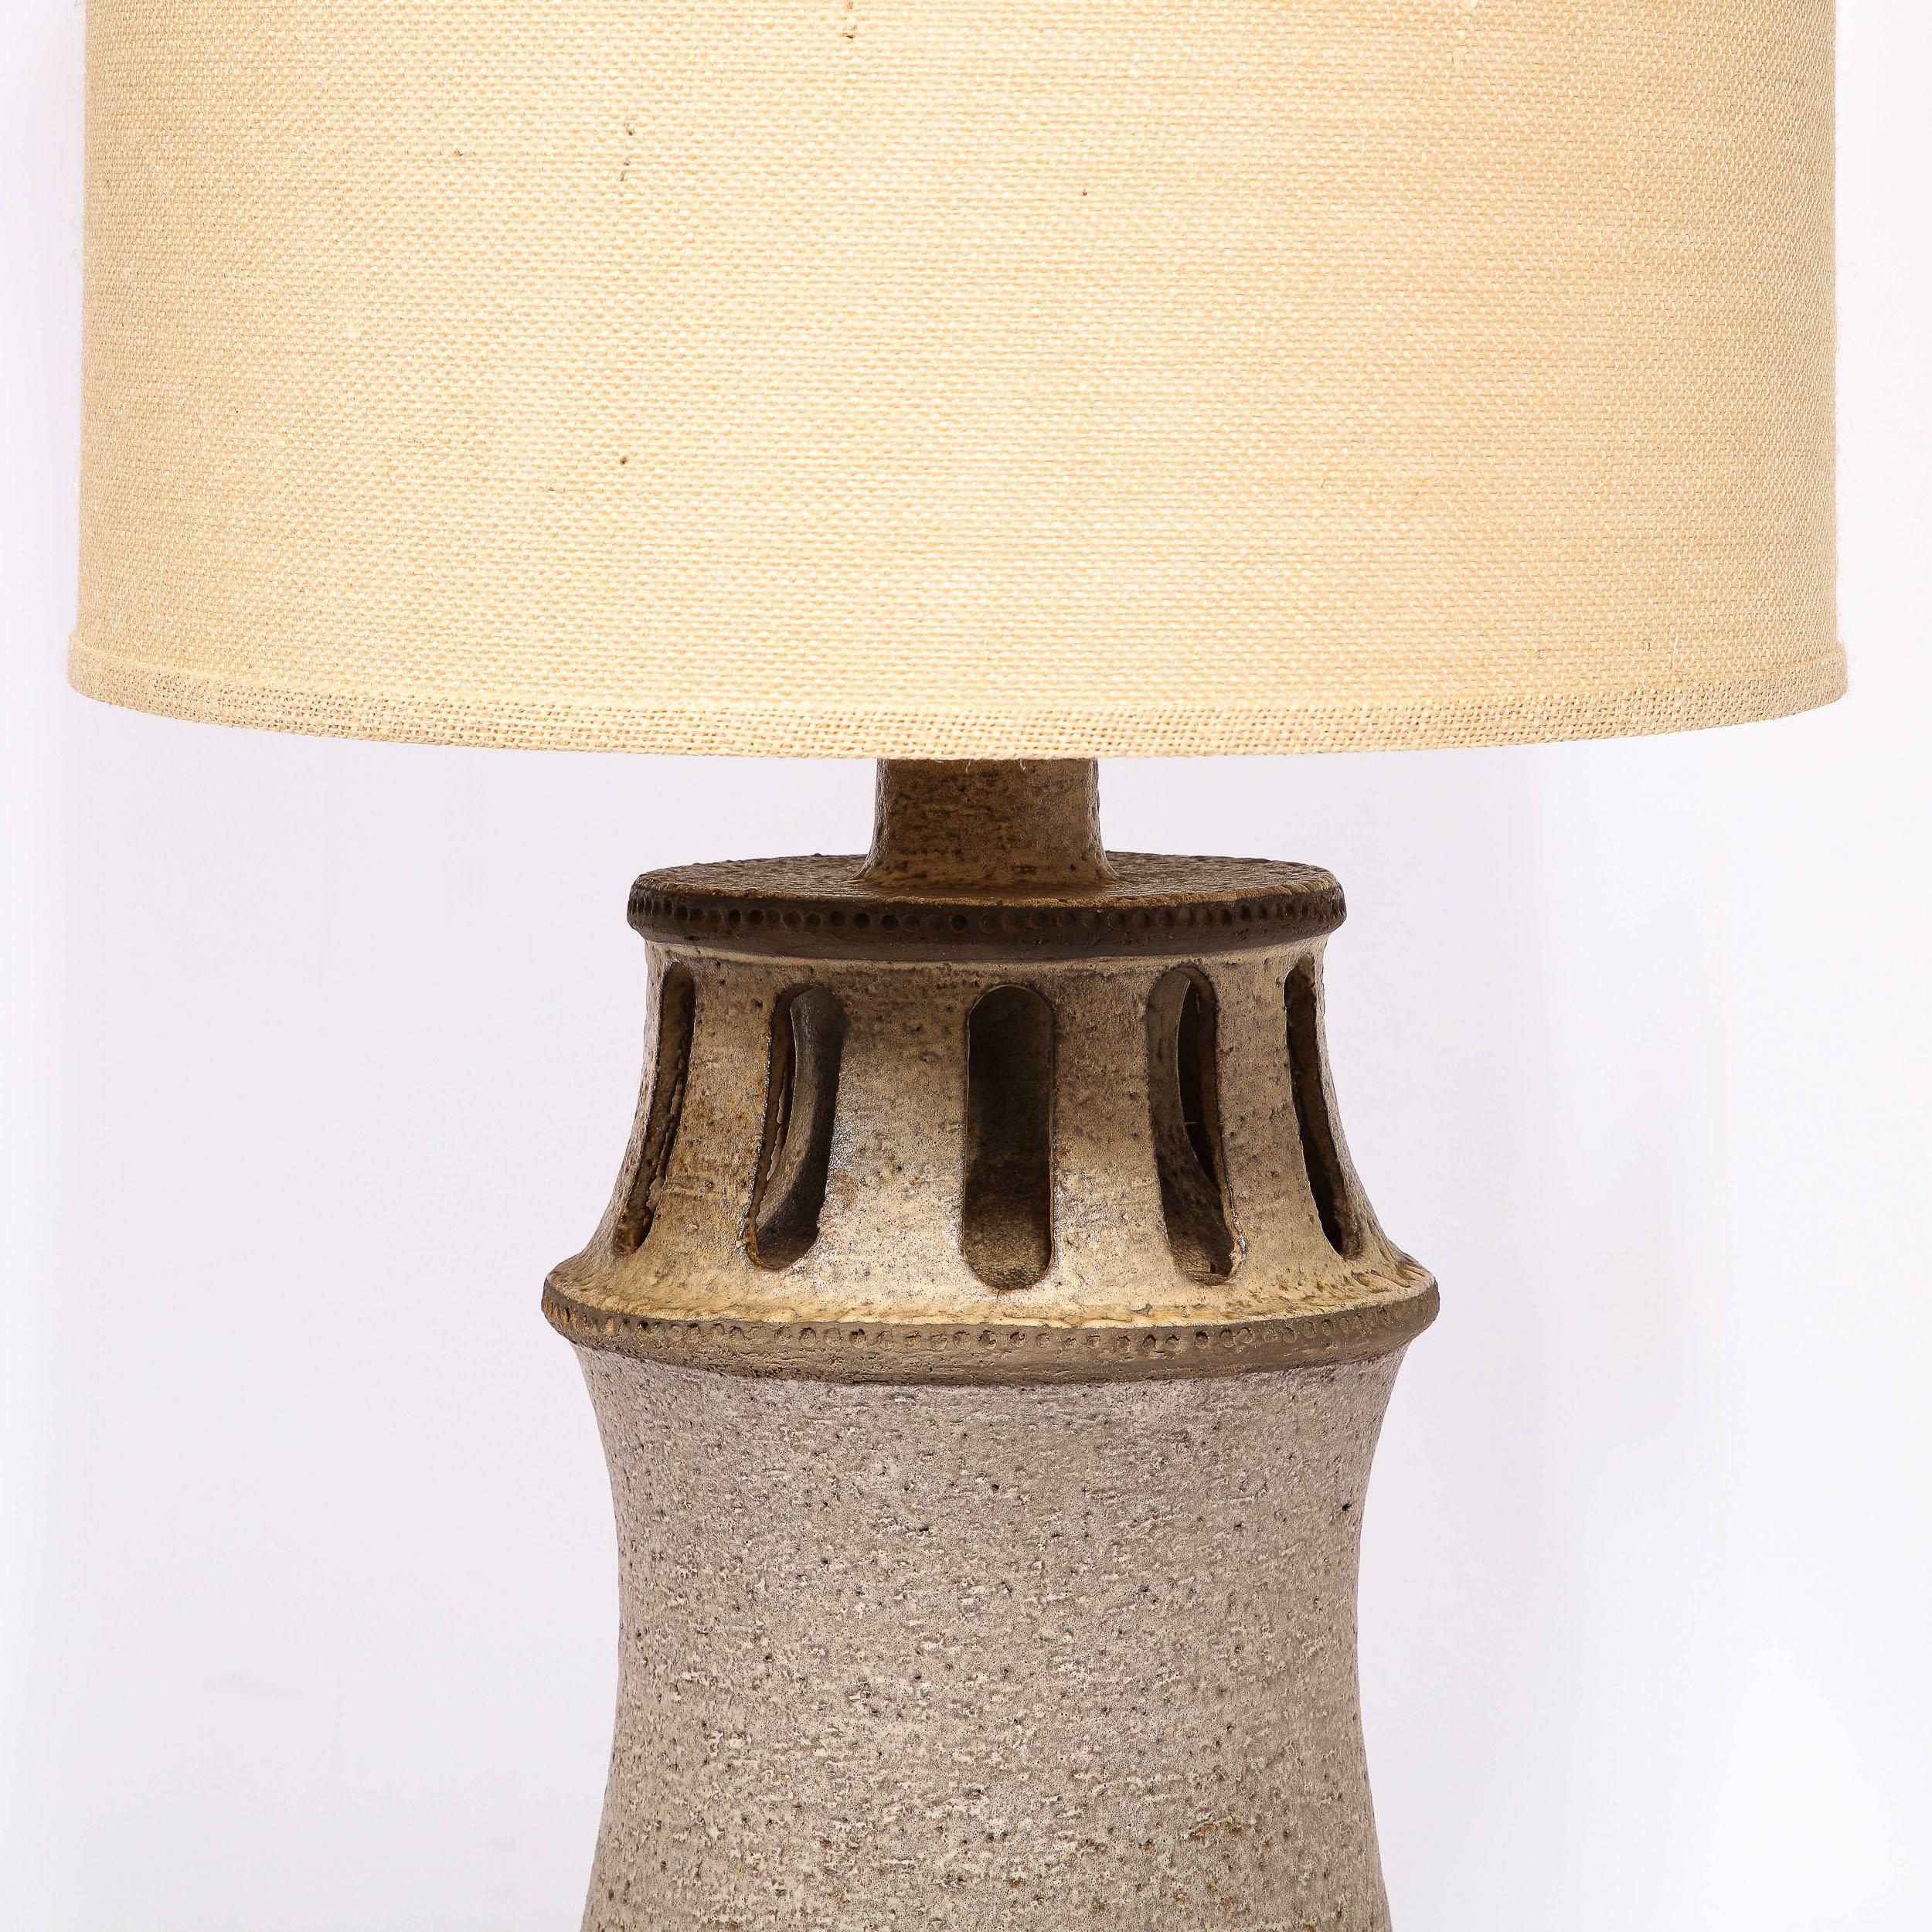 Hand-Painted Mid-Century Modern Ceramic Table Lamp w/ Arcade Detailing and Raw Fiber Shade For Sale